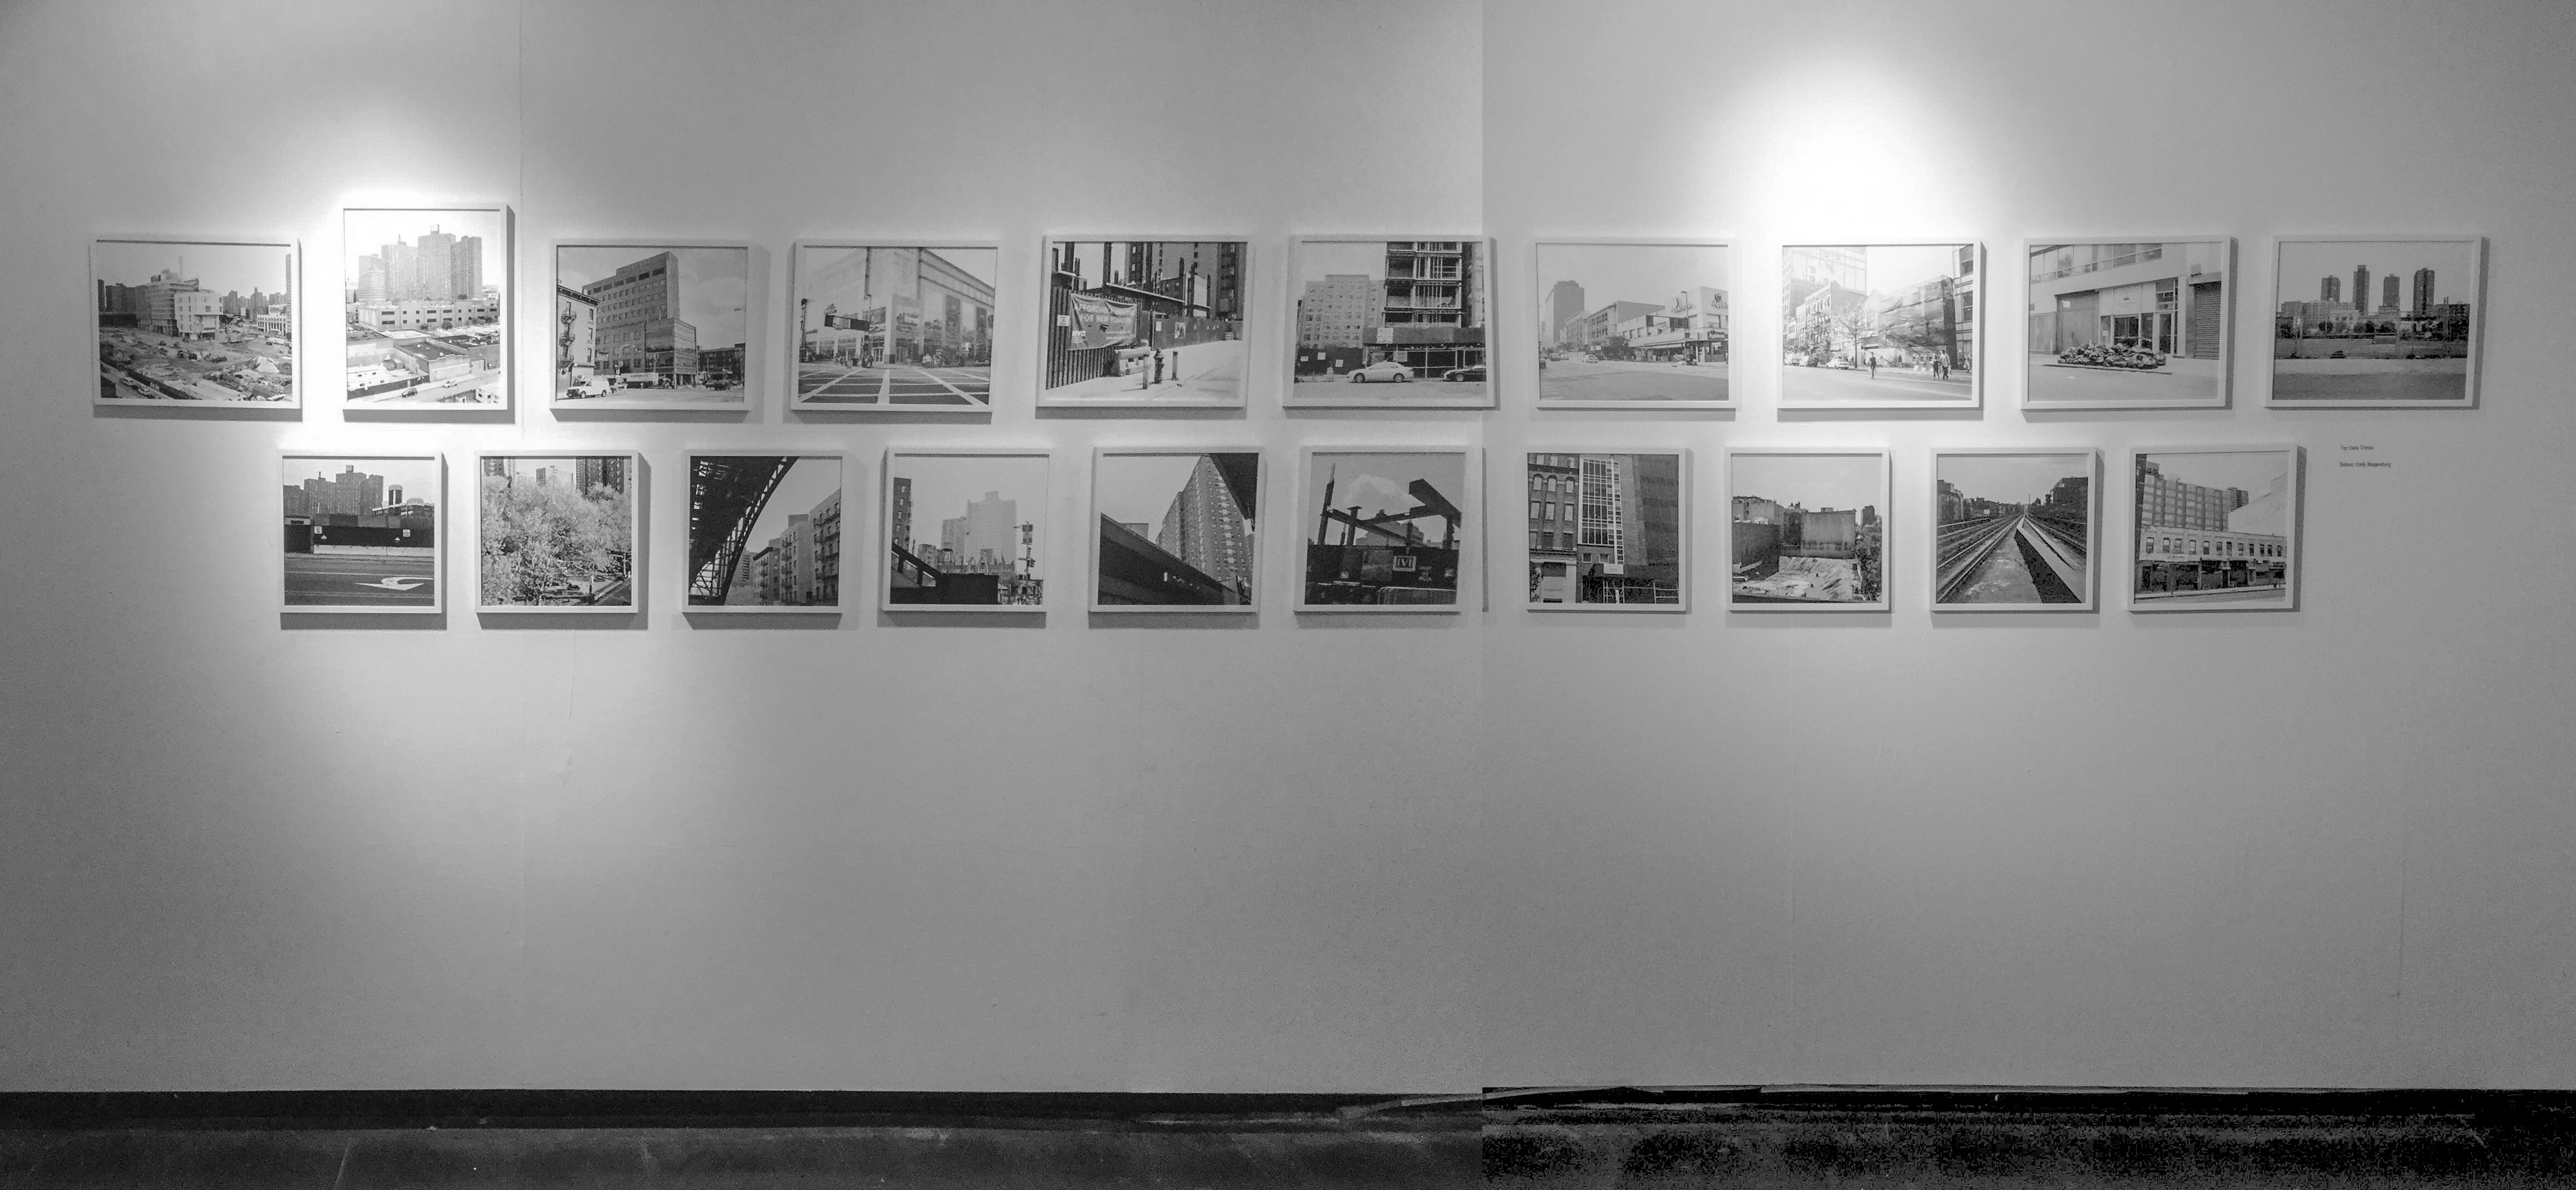 Black and white photograph featuring photographs presented on the wall